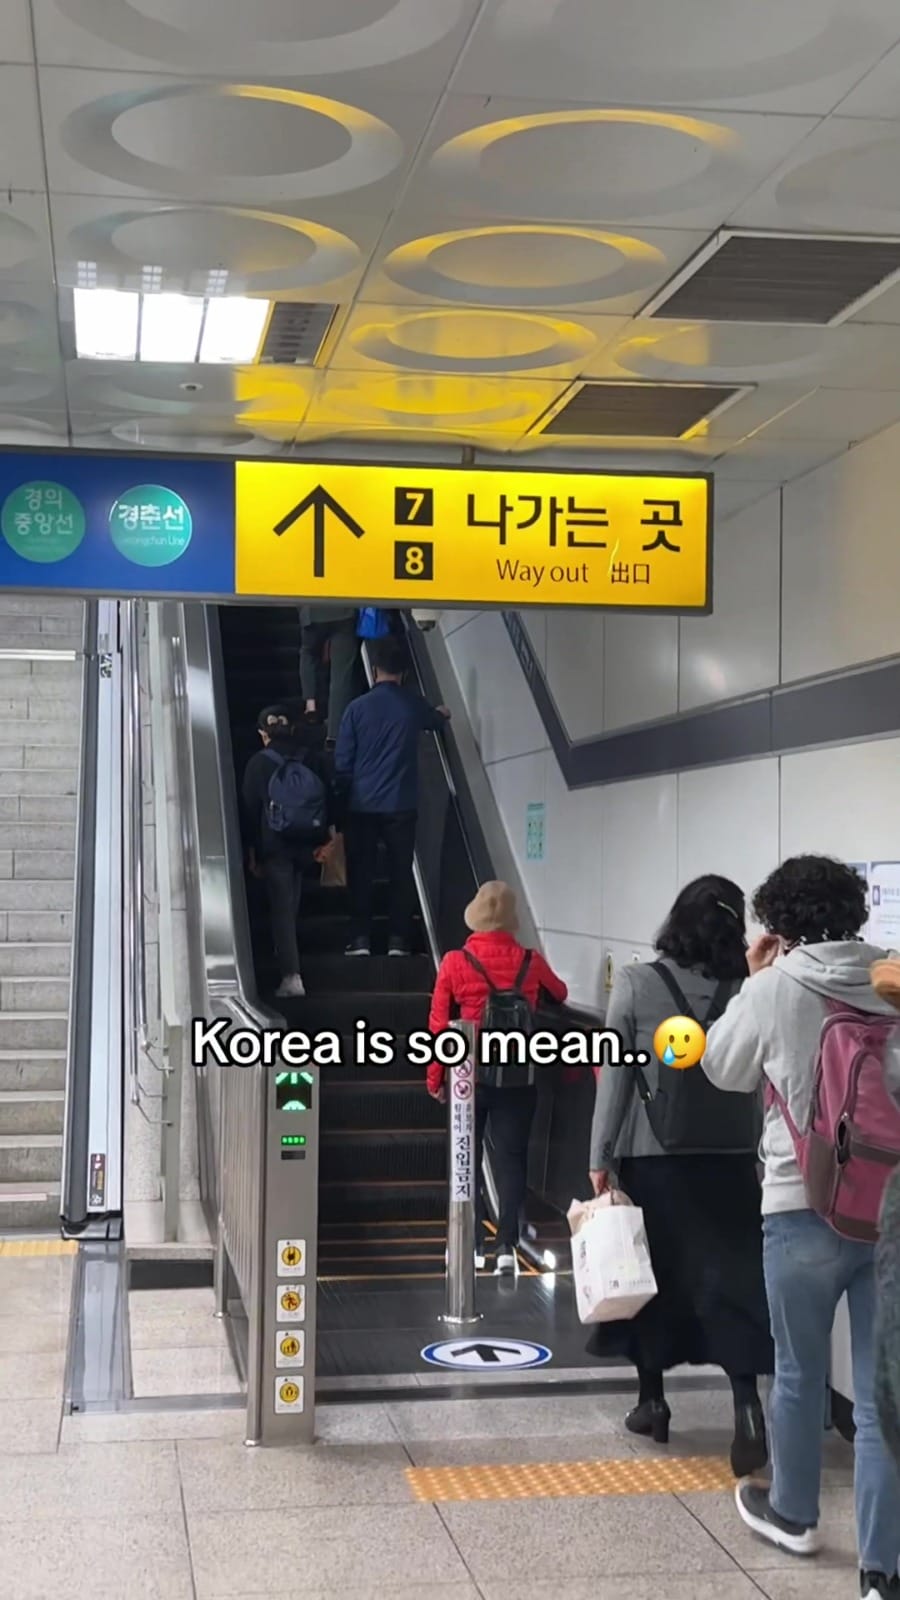 korea train station signs fat shamed encourage commuters take stairs instead of escalator 4